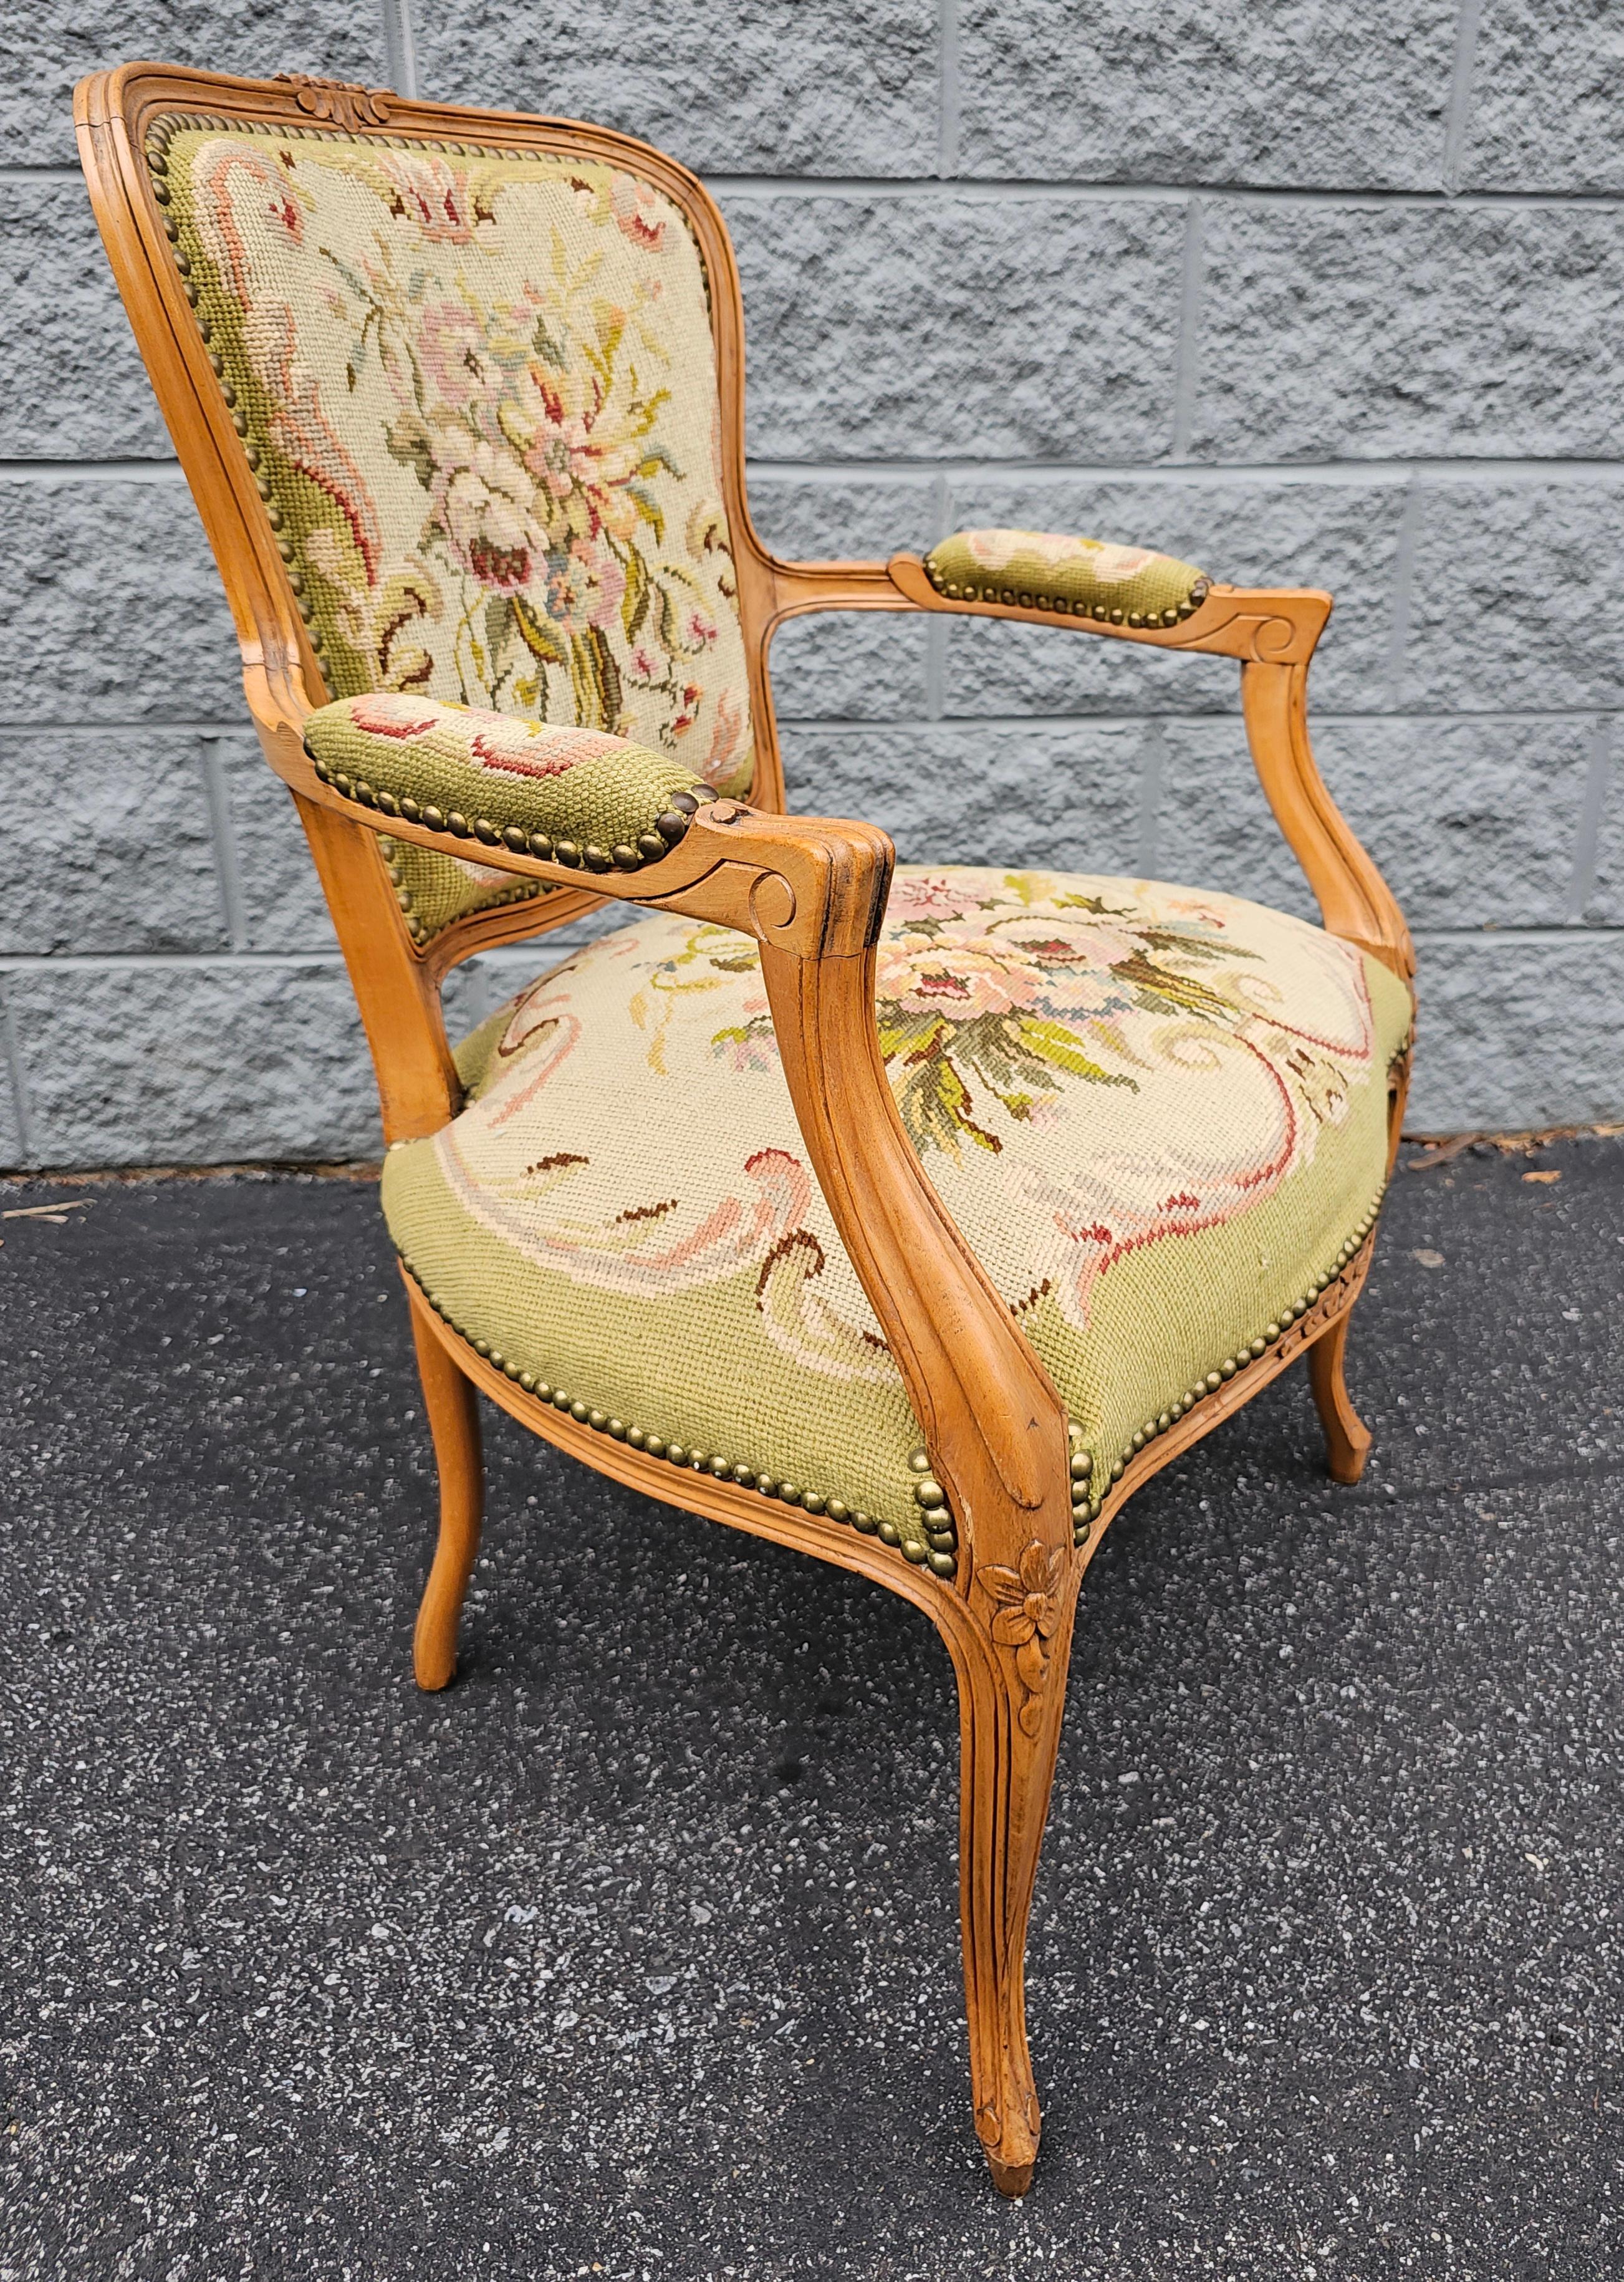 20th Century Louis XV Style Fruitwood And Needlepoint Upholstered Fauteuil For Sale